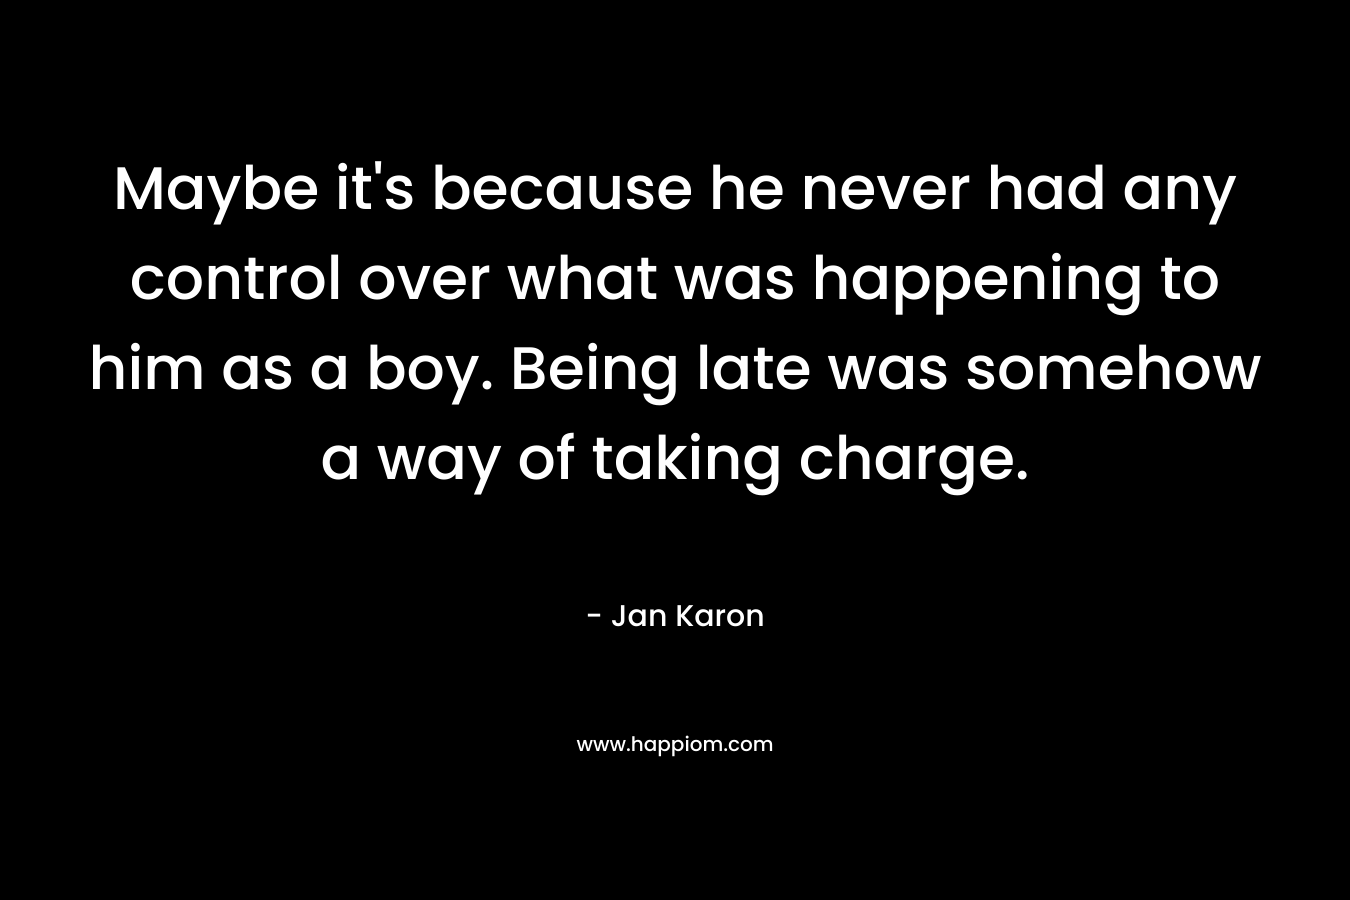 Maybe it's because he never had any control over what was happening to him as a boy. Being late was somehow a way of taking charge.